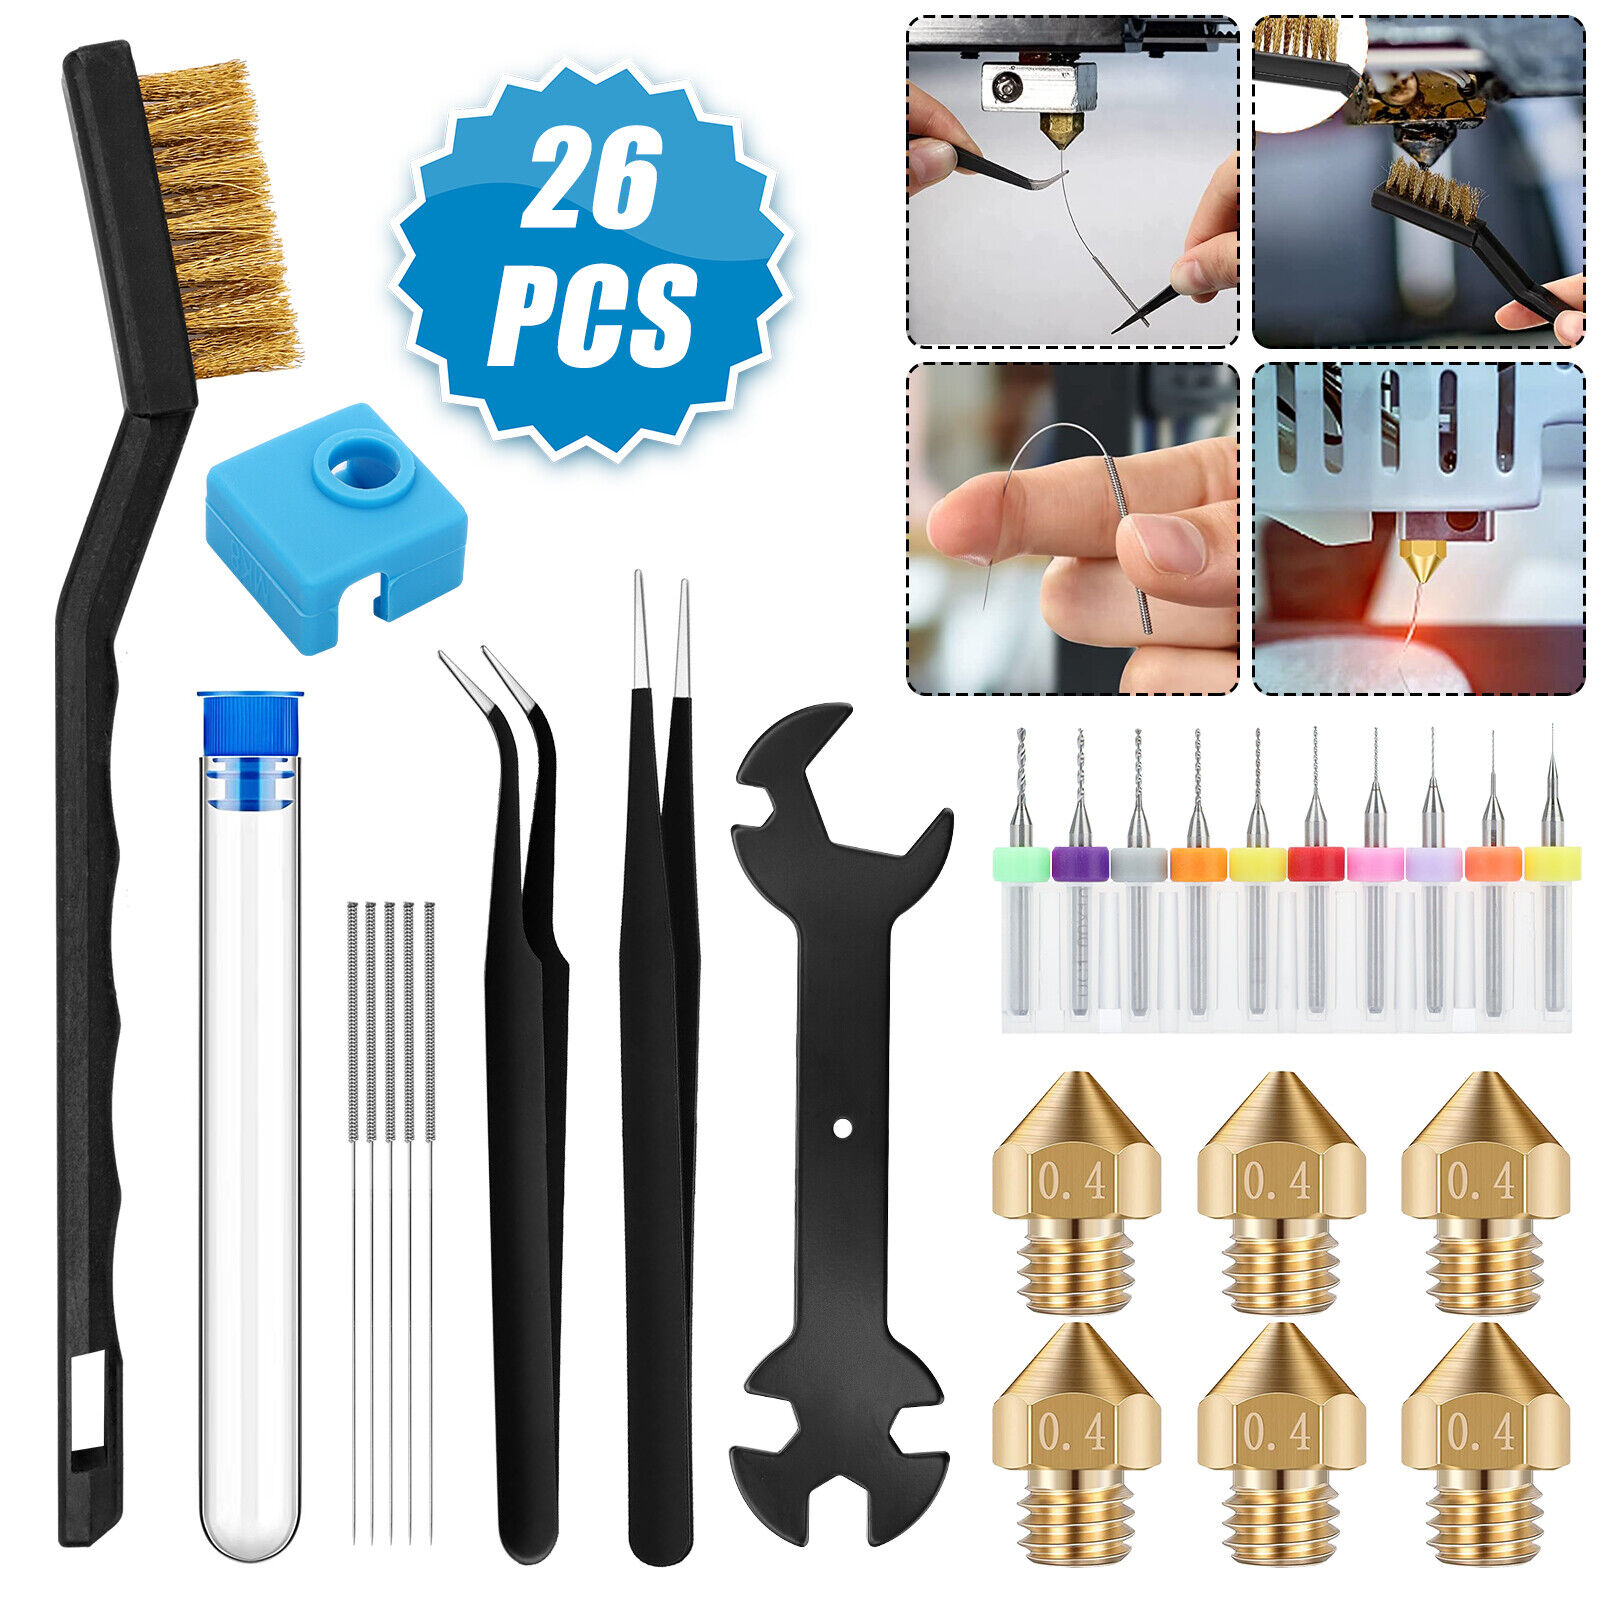 26PCS Extruder Nozzle Cleaning Needles Tool Kit for 3D Printer CR-10/Ender 3 Pro